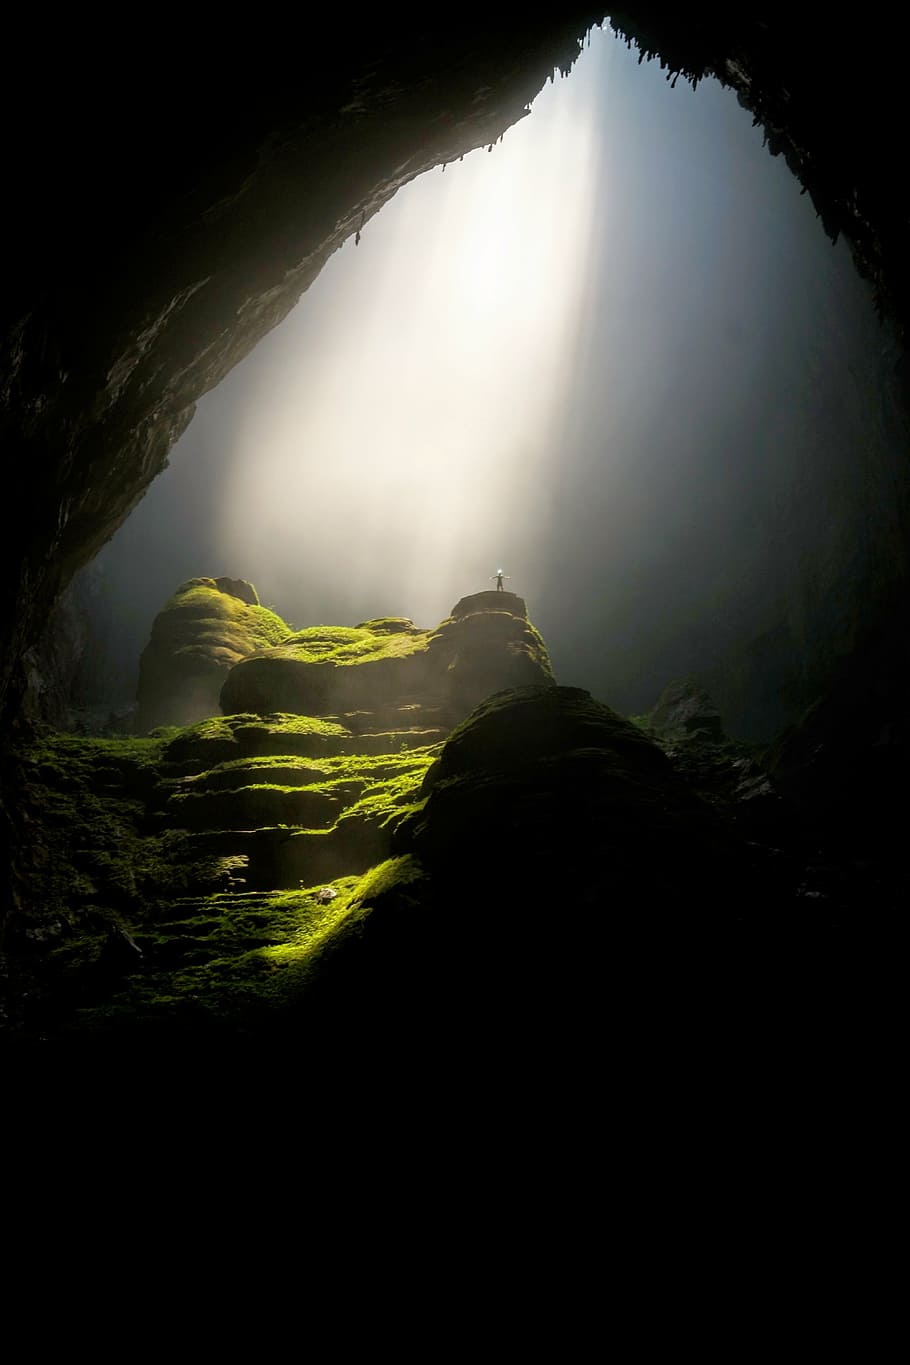 grass covered cave, cave, cavern, dark, daylight, landscape, moss, nature, rocks, stone cave